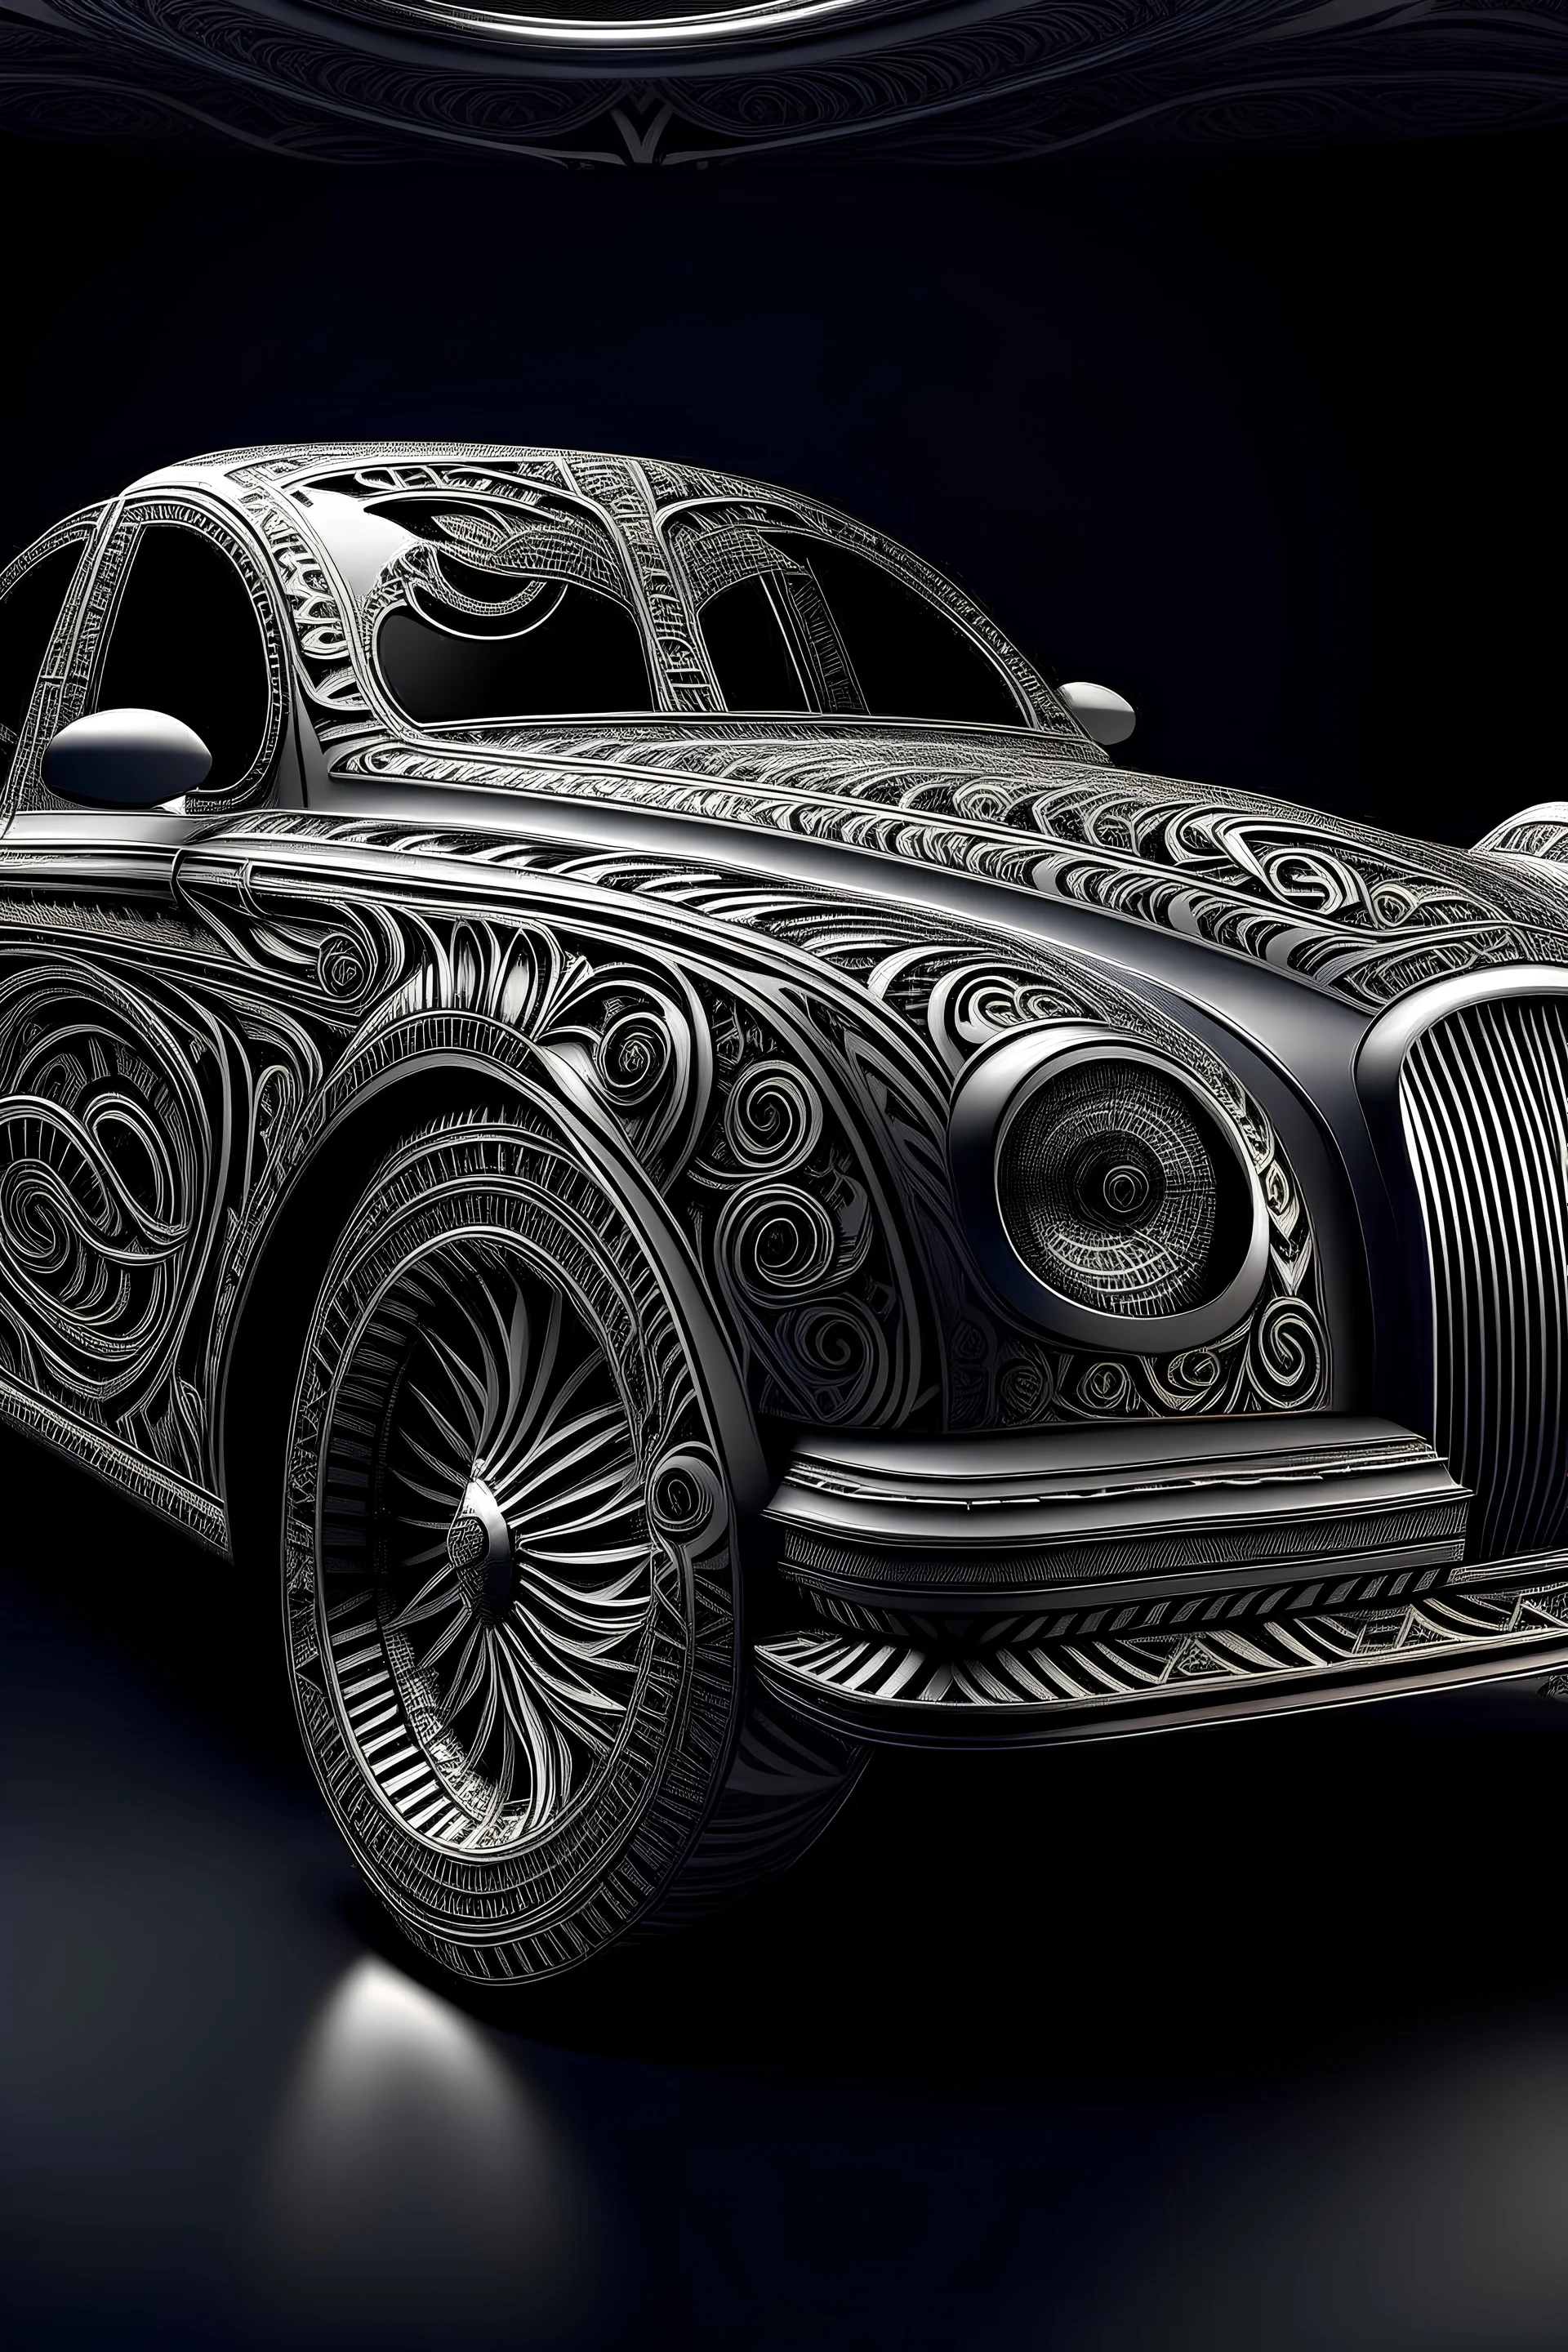 Car design with Arabic ornaments, bar light, creative,Arabic calligraphy, arabesques, highly detailed, hyper realistic